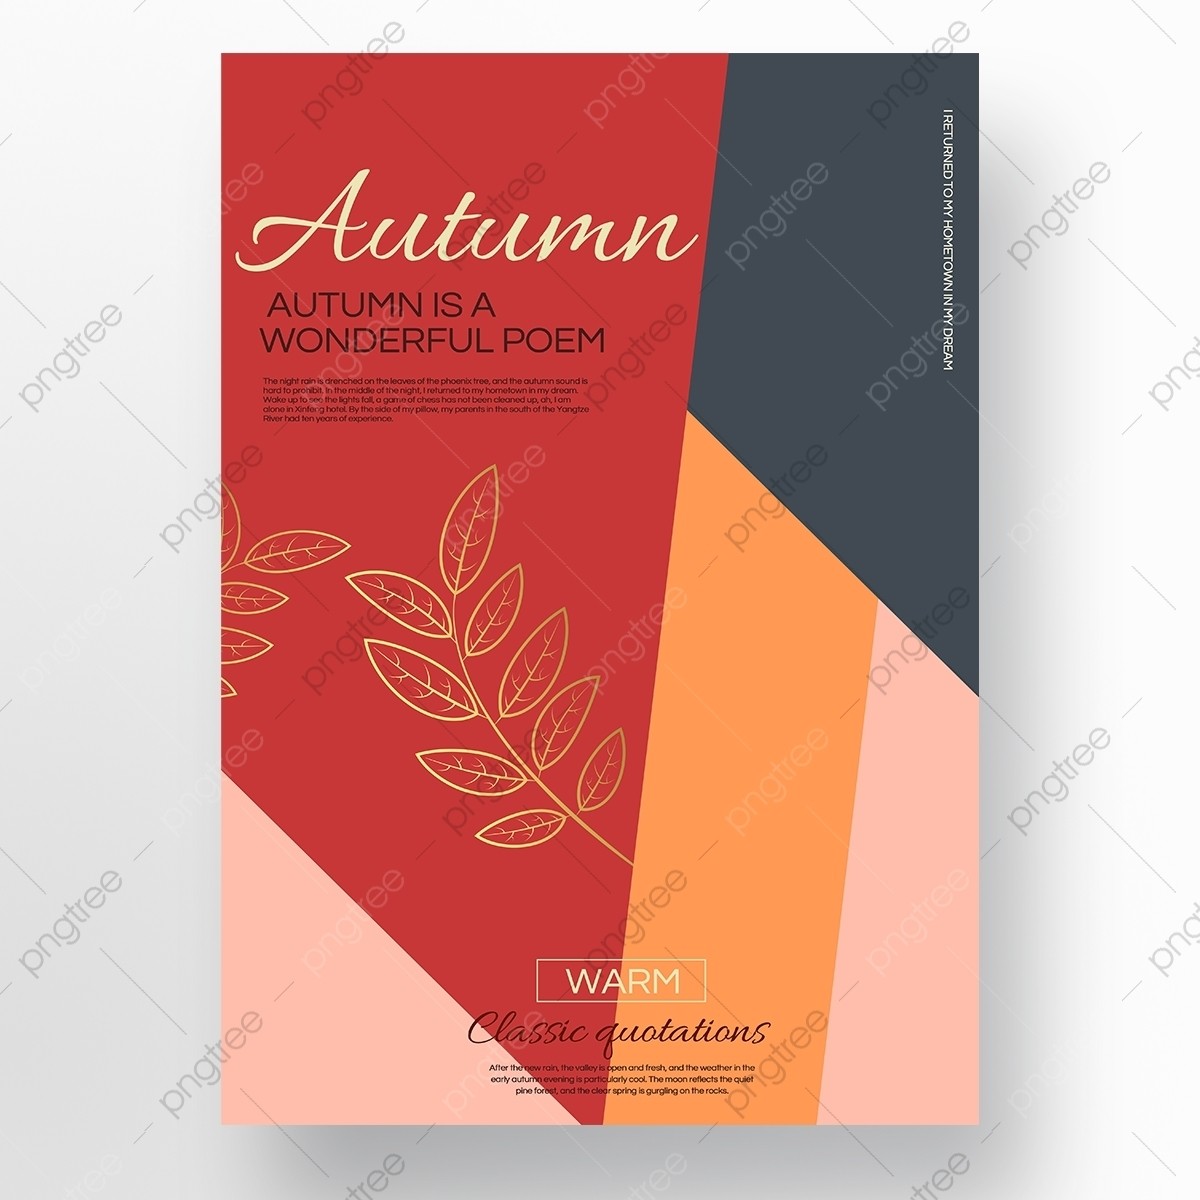 pngtree-simple-warm-autumn-book-cover-png-image_5491265